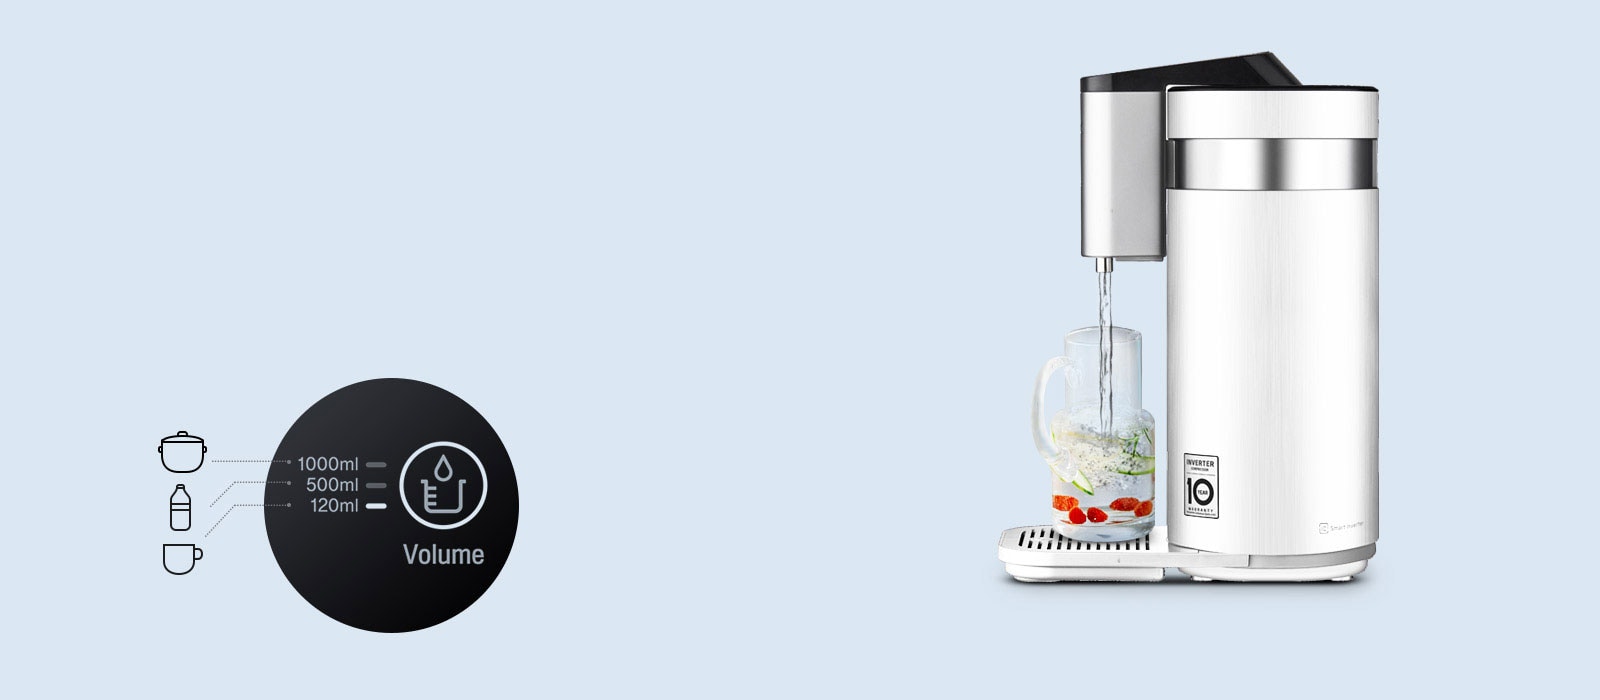 A second image shows the water filter filling a juice decanter. Next to it are three icons for a cup, bottle, and pot and the different amounts to fill them labeled.